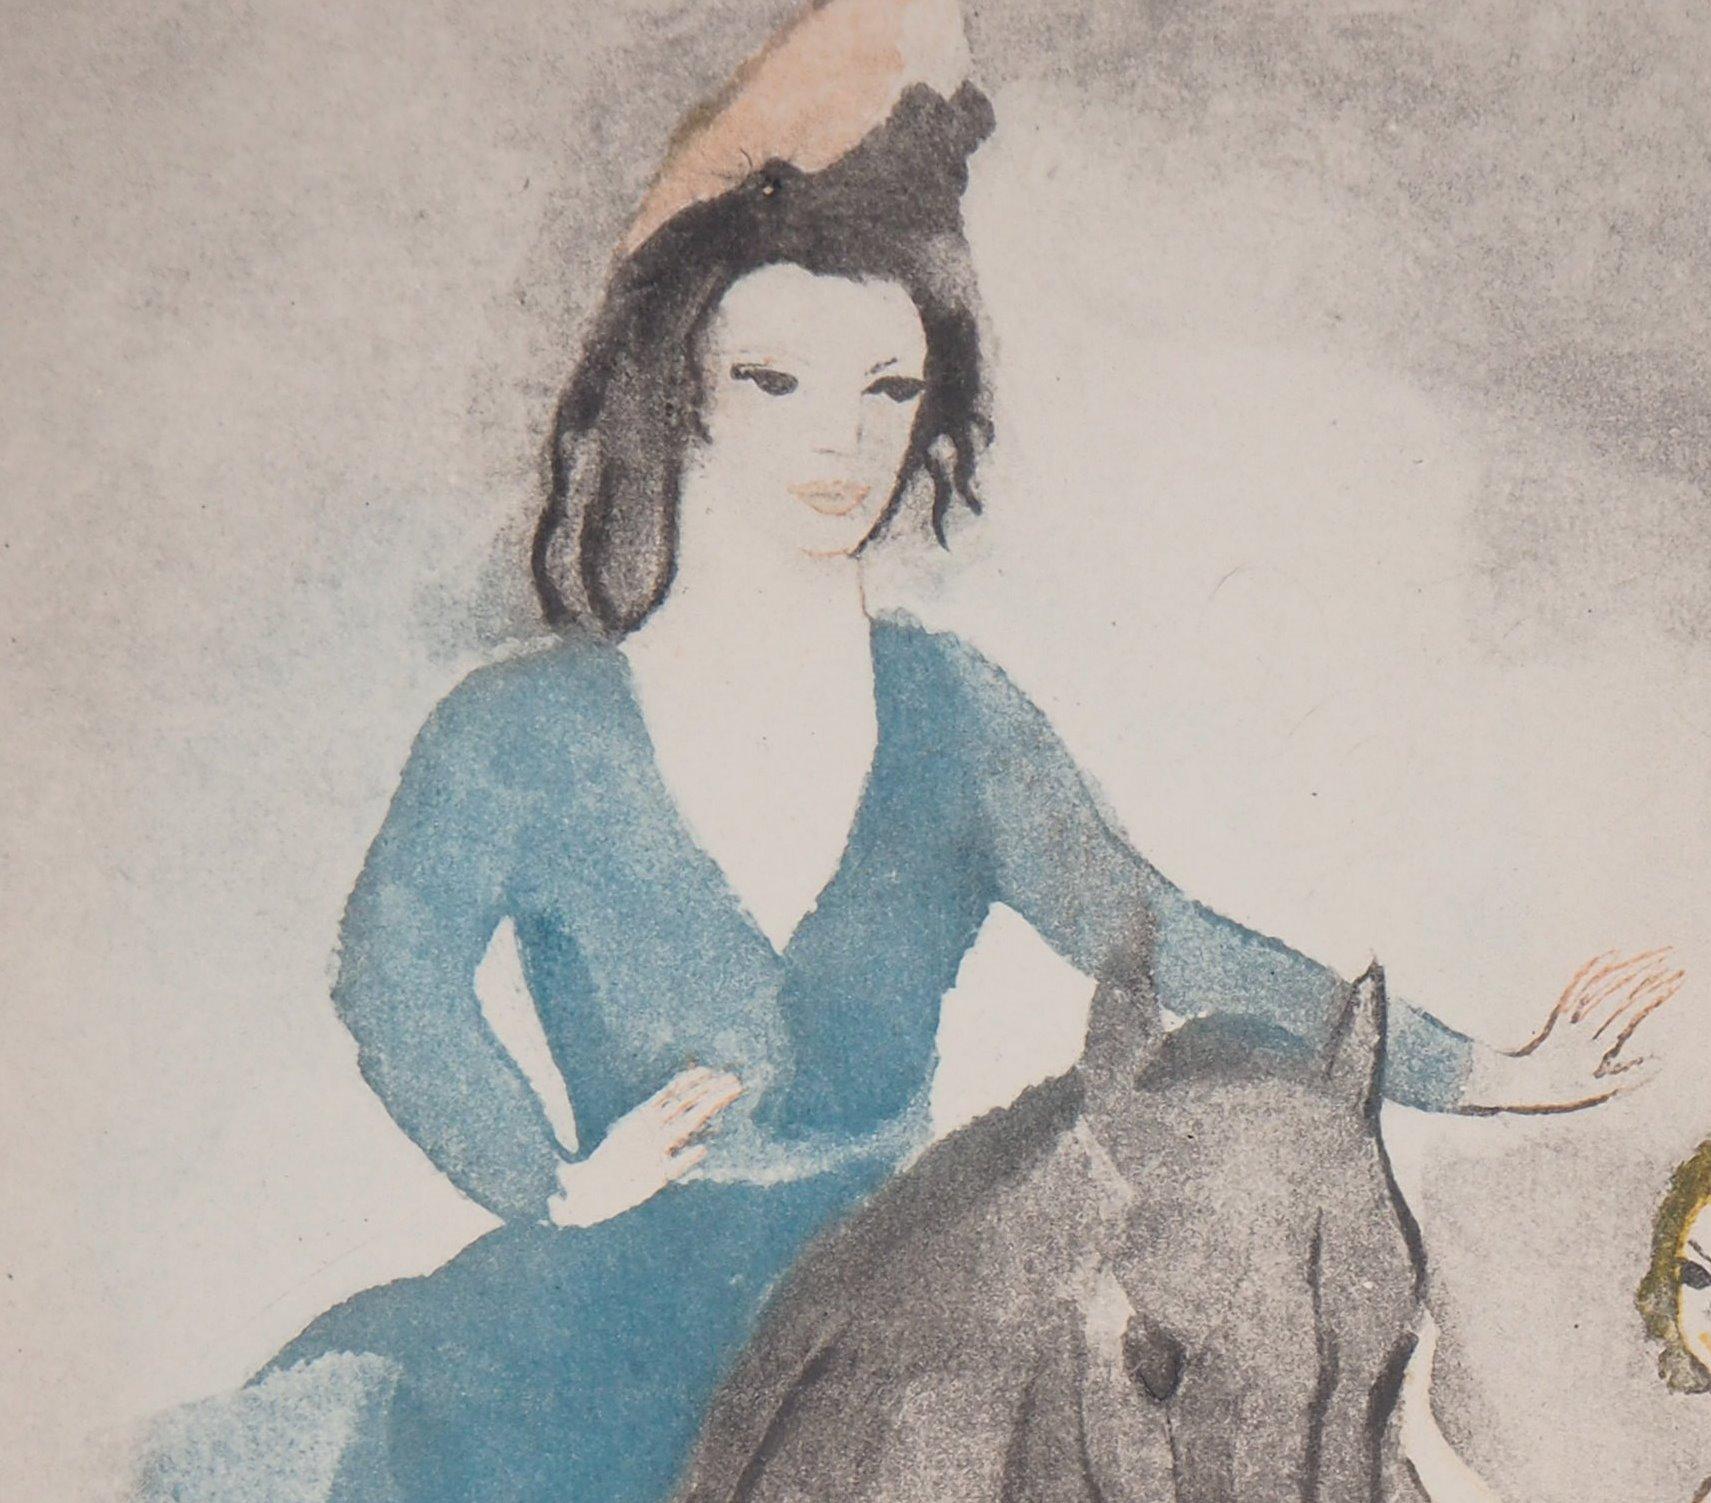 Rider and Dancer - Original Etching - Modern Print by Marie Laurencin